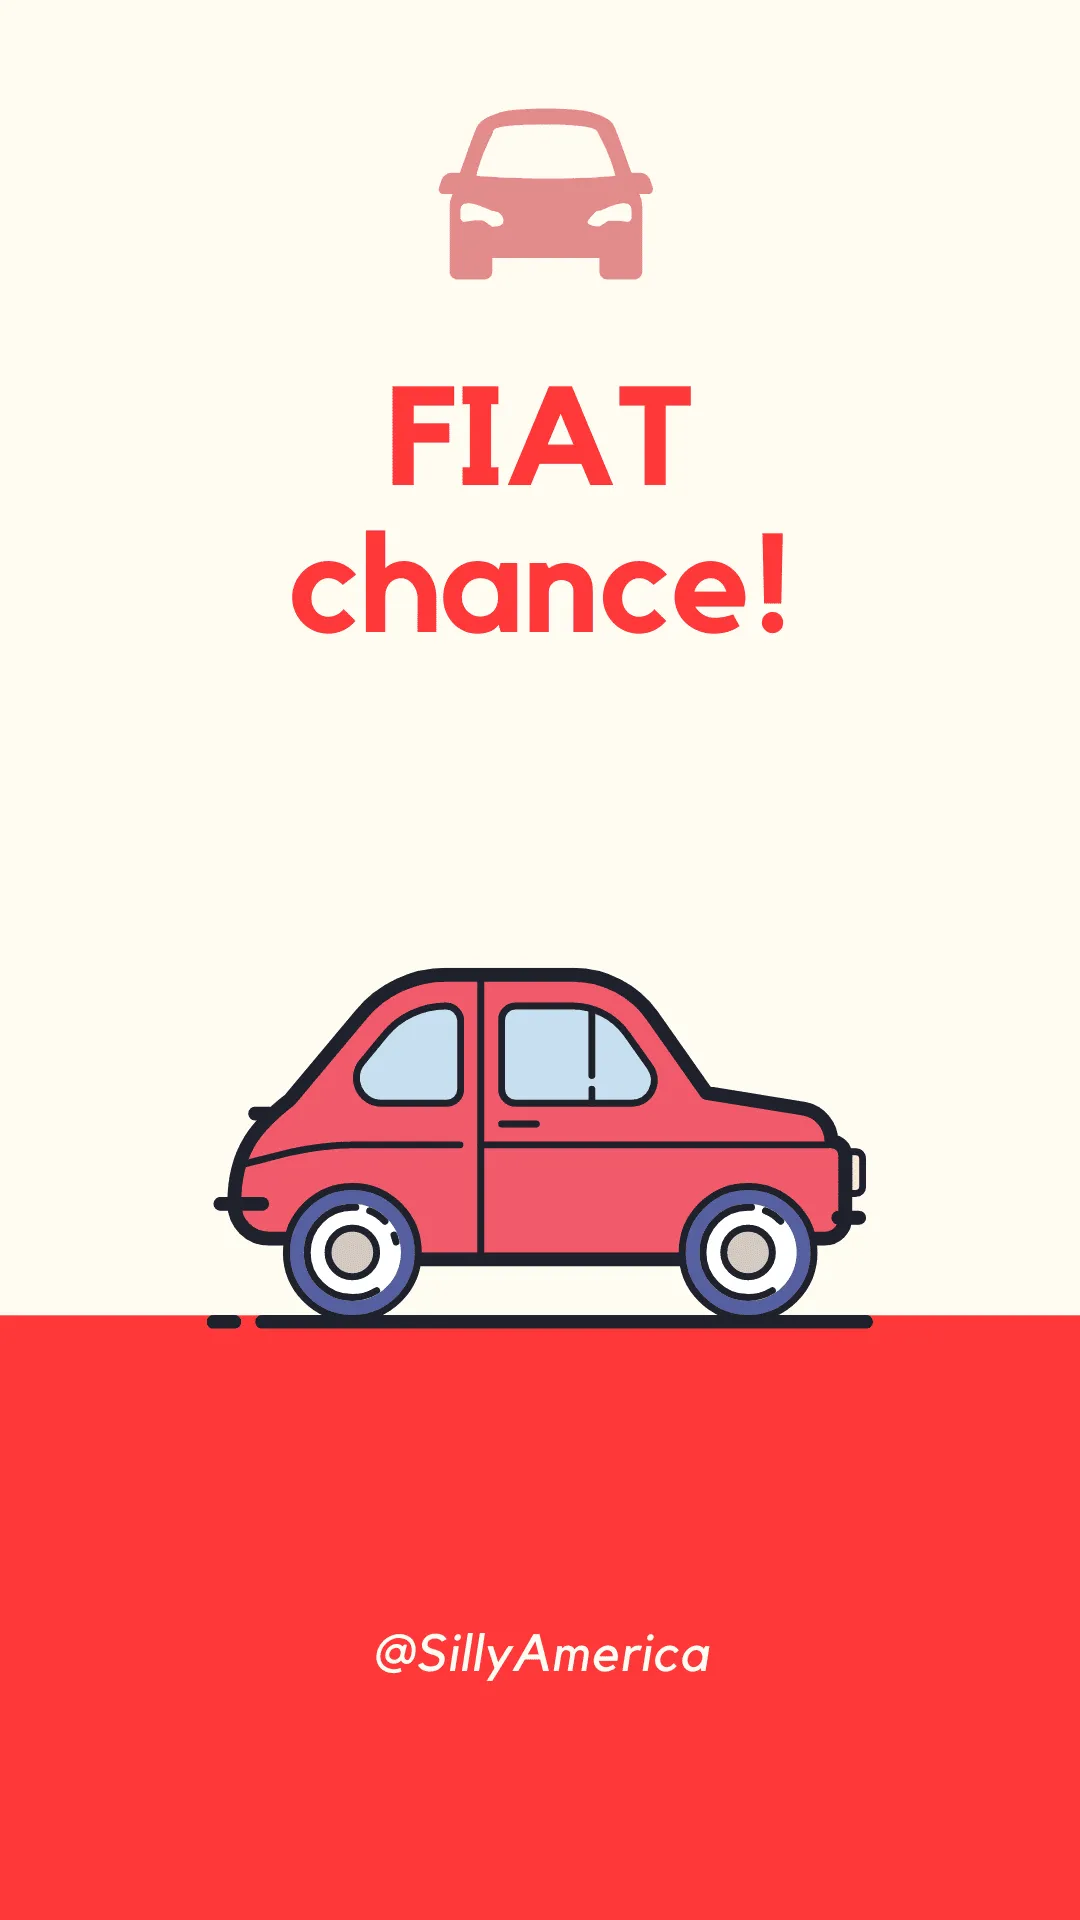 FIAT chance! - Car Puns to fuel your road trip content!